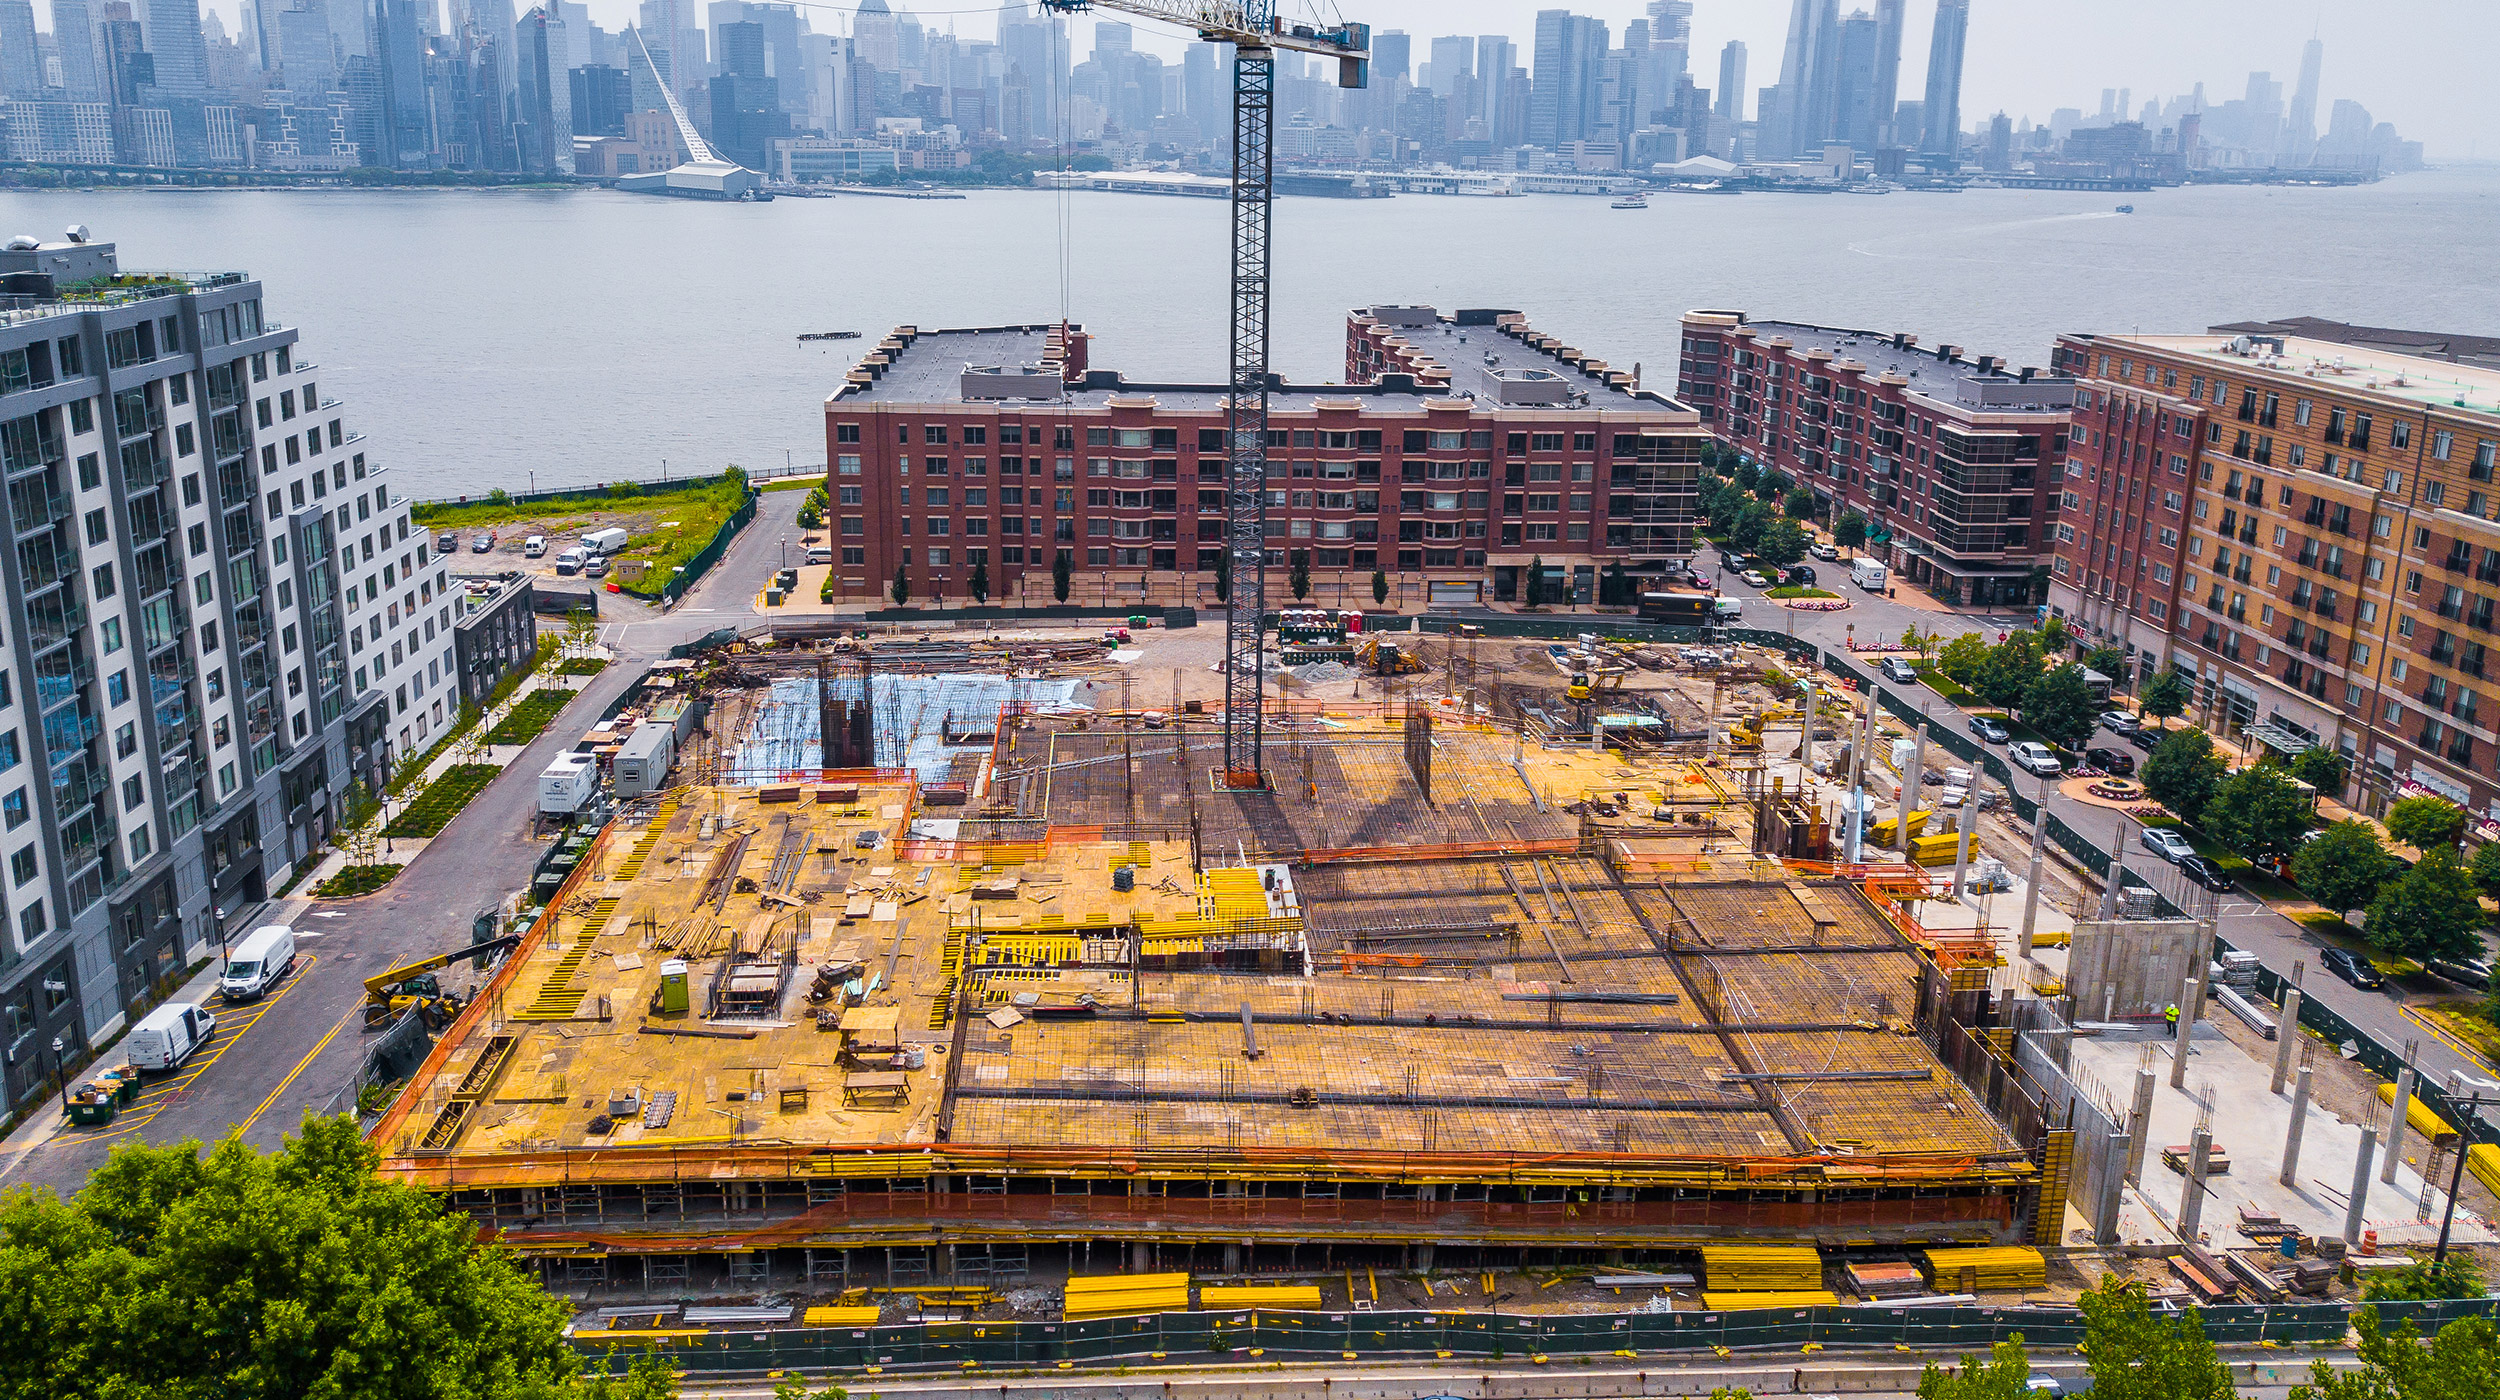 Port Imperial project is located along the Hudson River waterfront in West New York, with spectacular views of the Manhattan skyline.